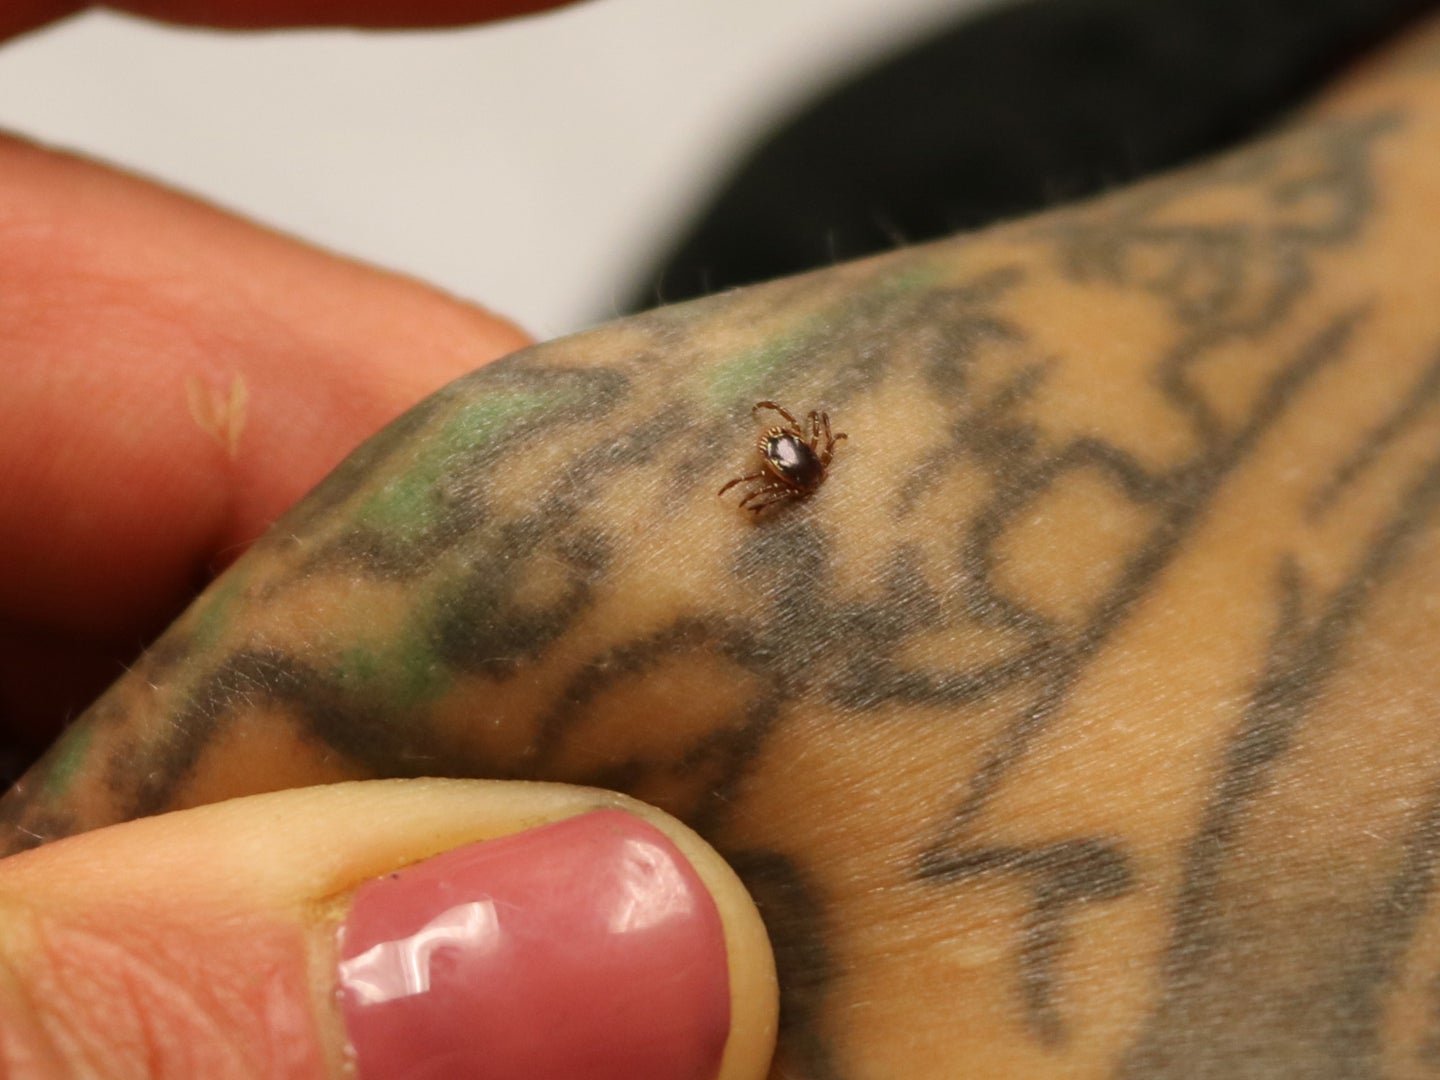 Ticks that cause red meat allergies are spreading, and invasive fire ants may be our best hope